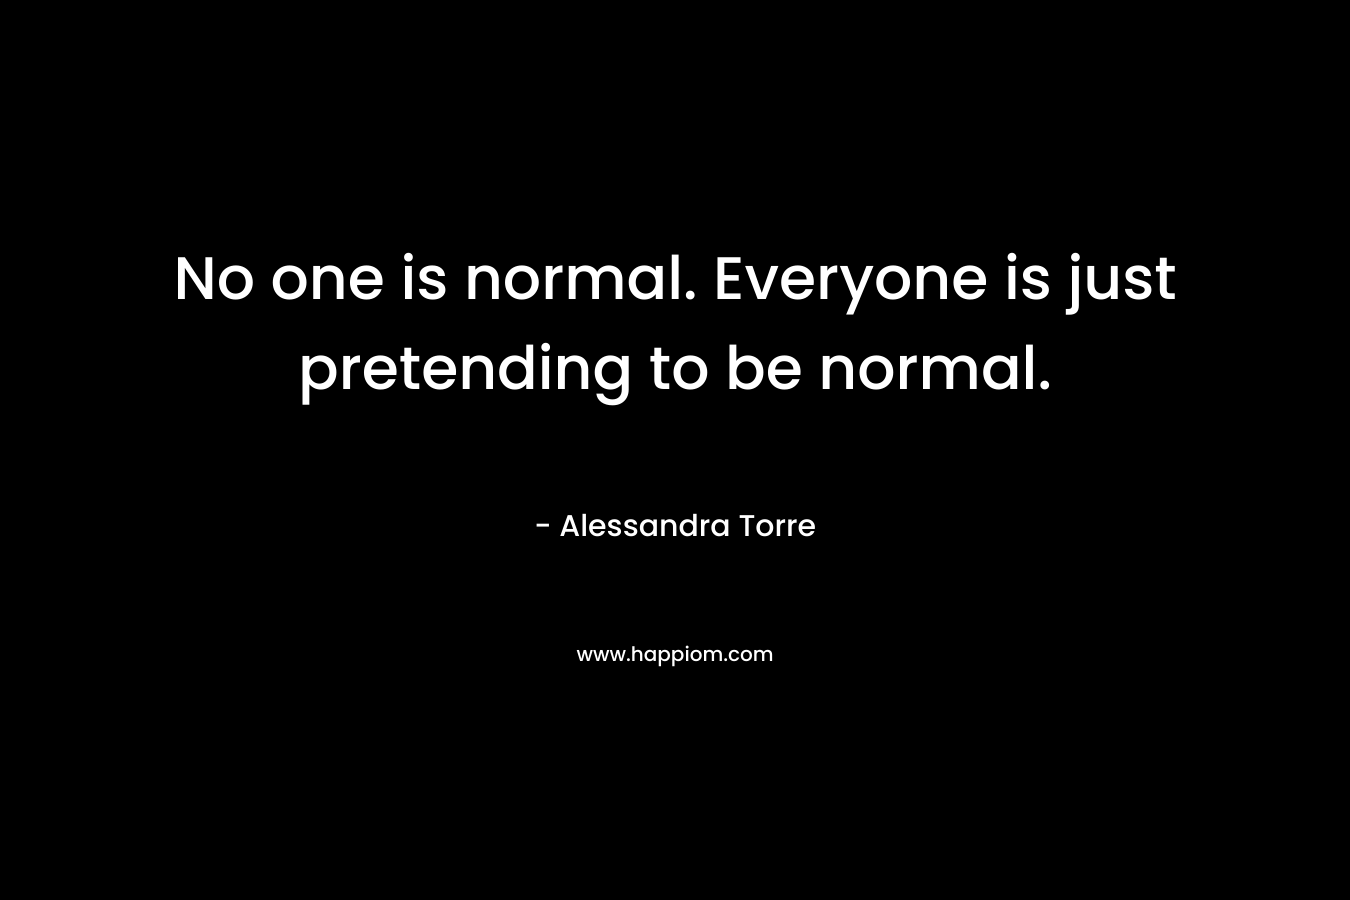 No one is normal. Everyone is just pretending to be normal.